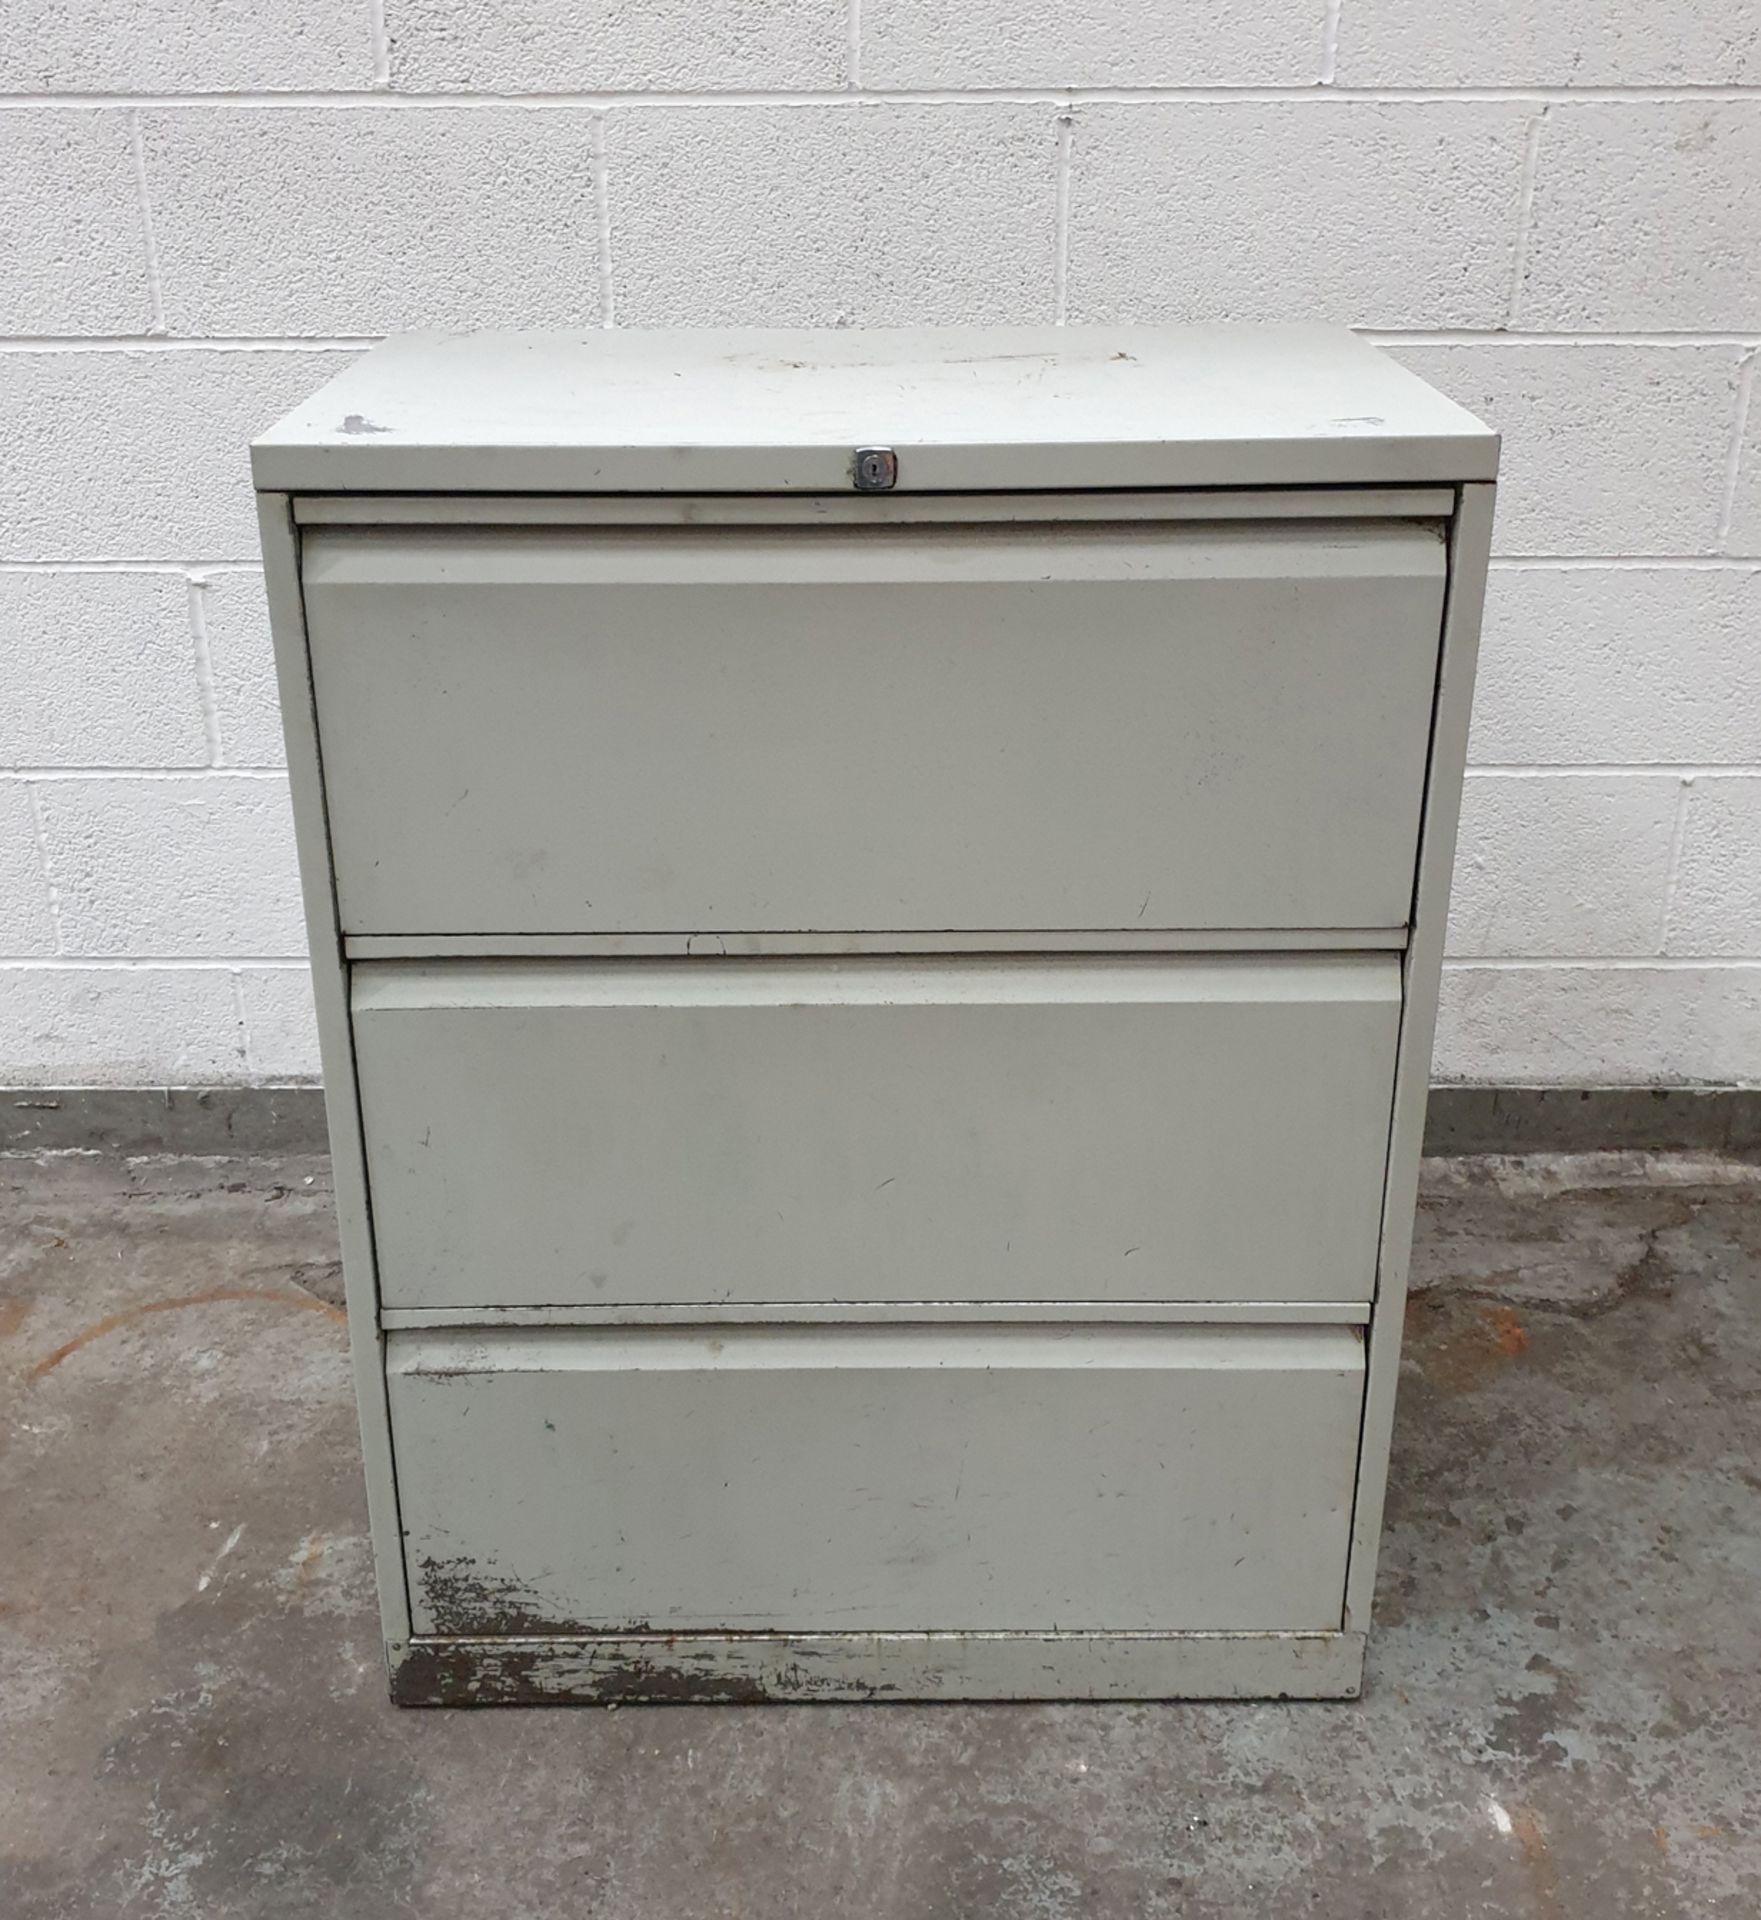 3 Drawer Cabinet With All Contents Included. 31" x 19 3/4" x 40" H